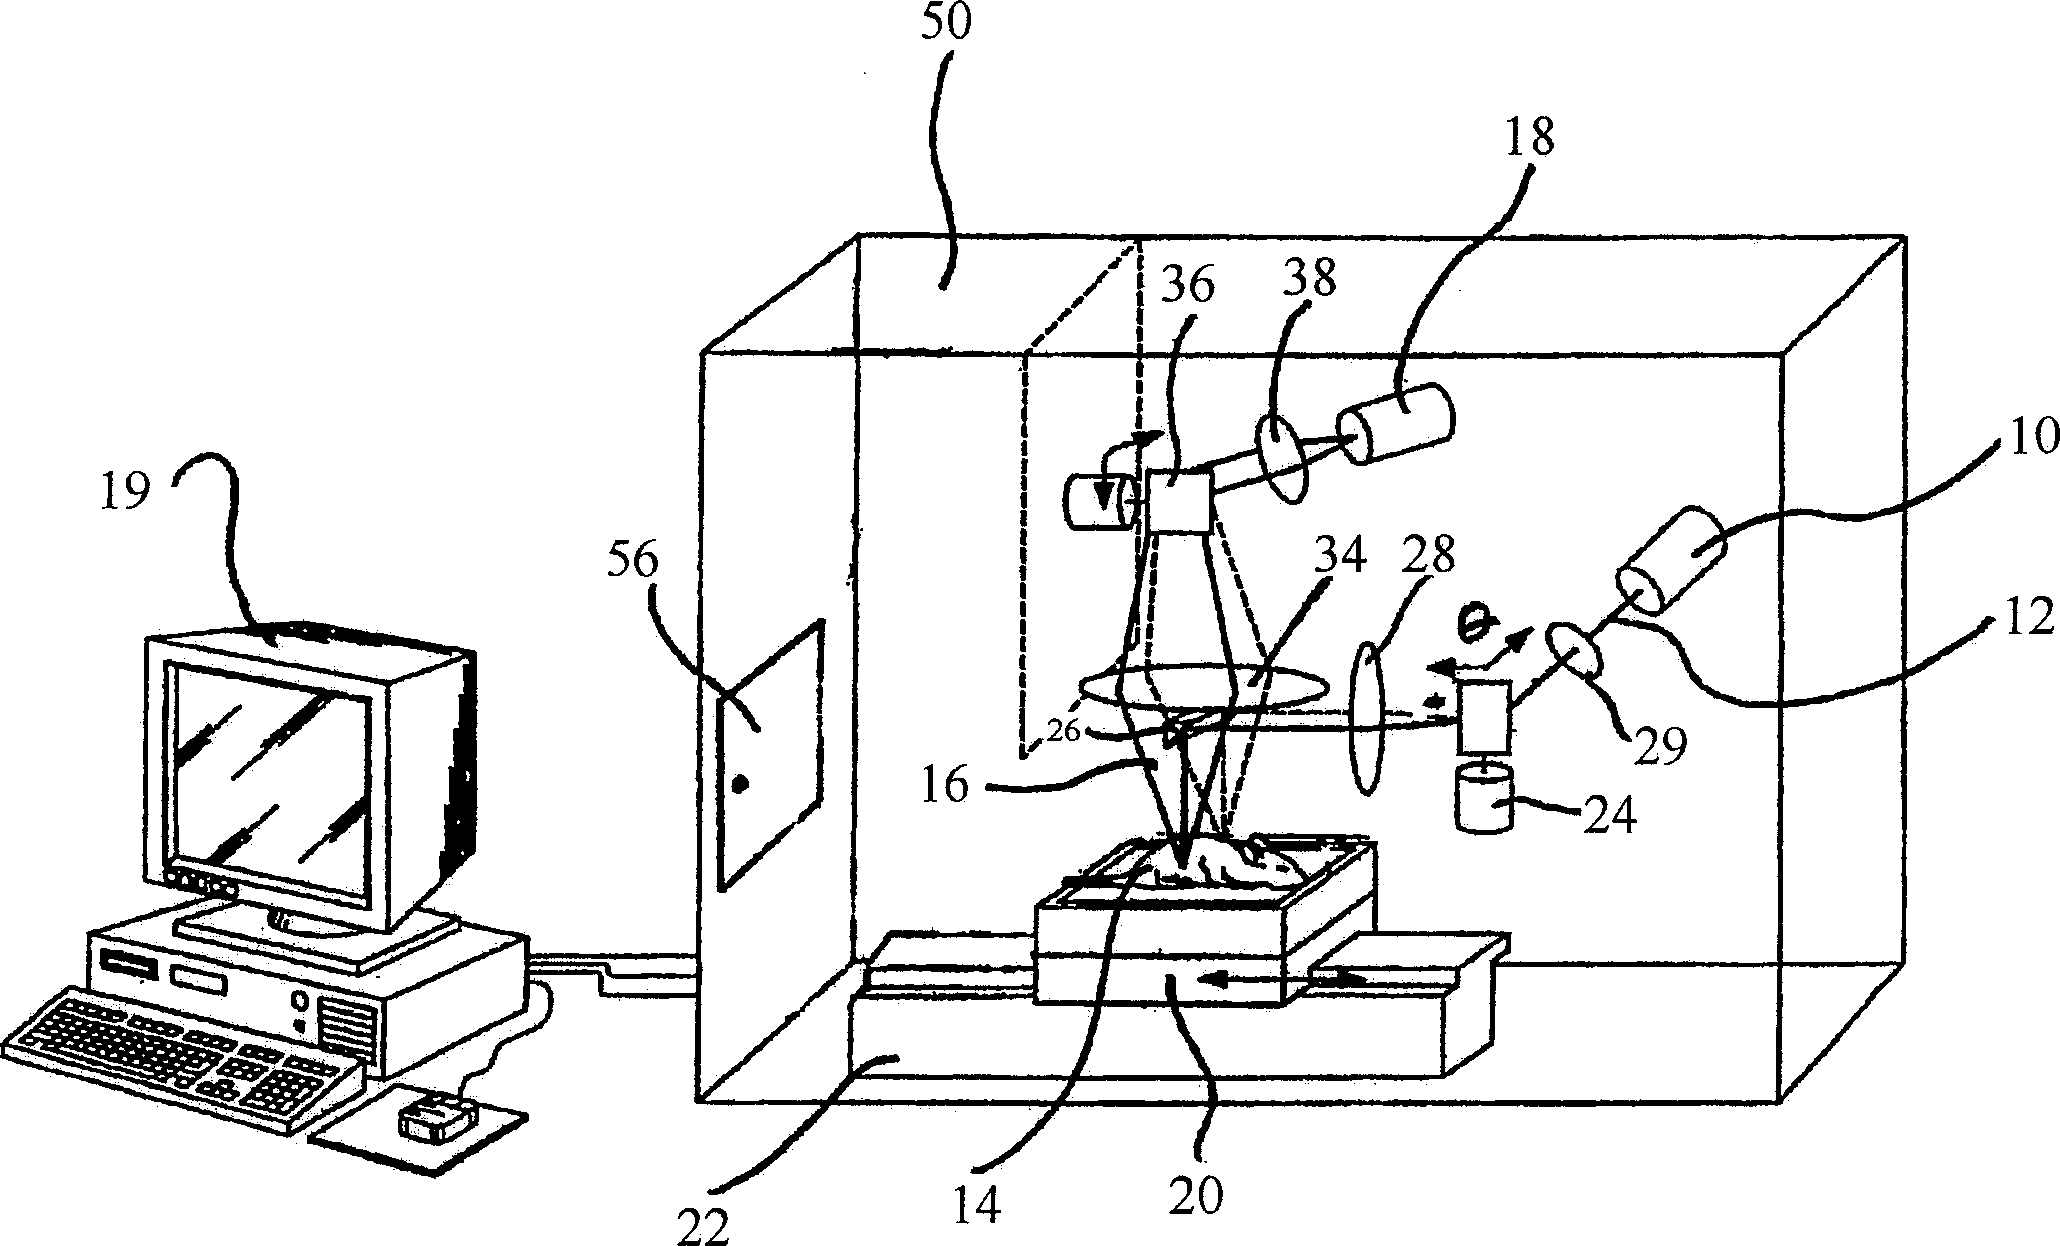 Time discrimination optics imaging method and equipment used for part biological tissues of animal body